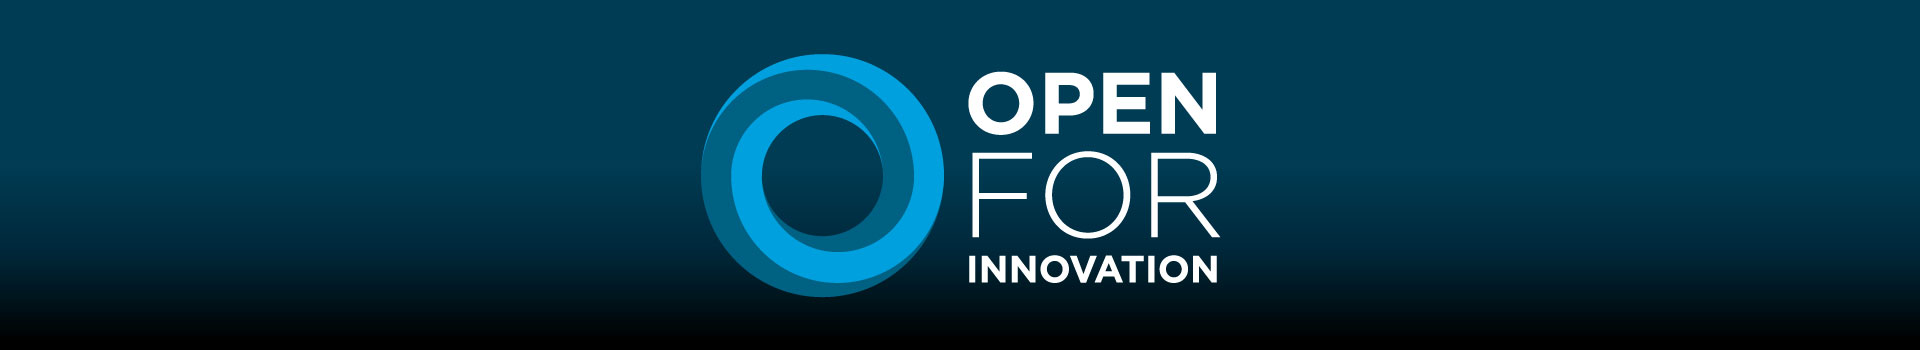 SOFTING A OPEN INNOVATION EXPO CON NETHESIS